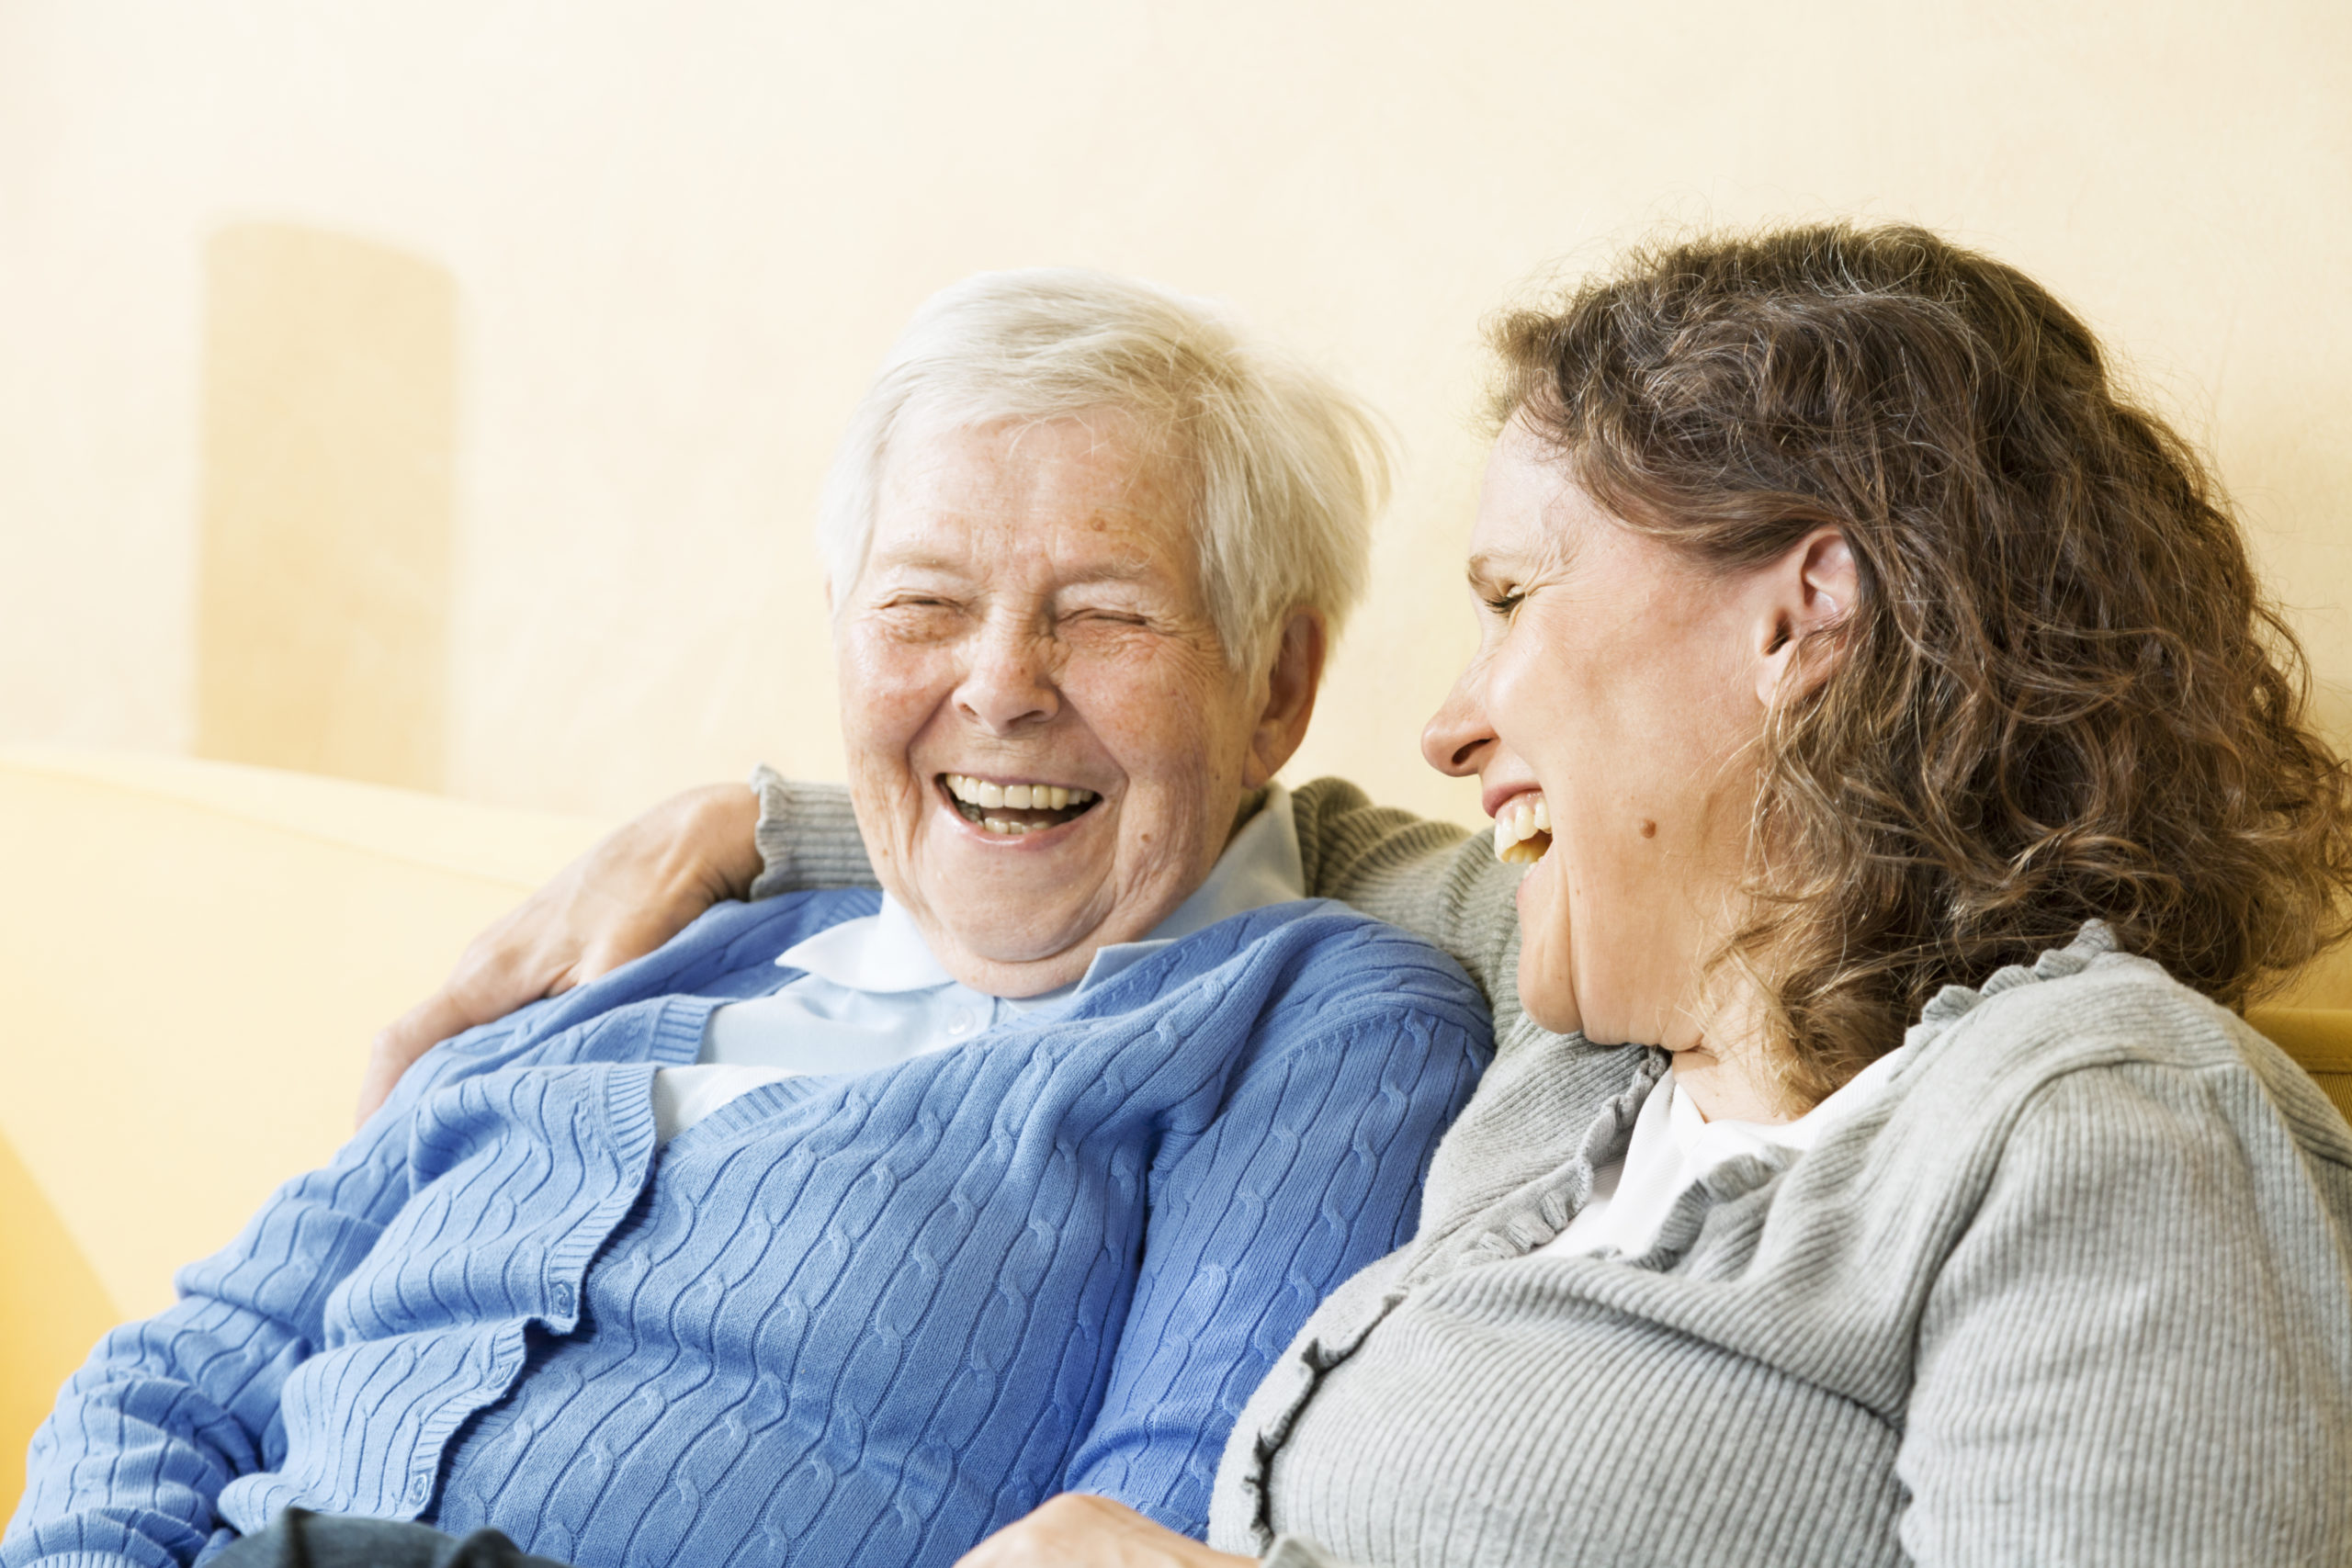 What to Expect From an Average Day as an In-Home Caregiver